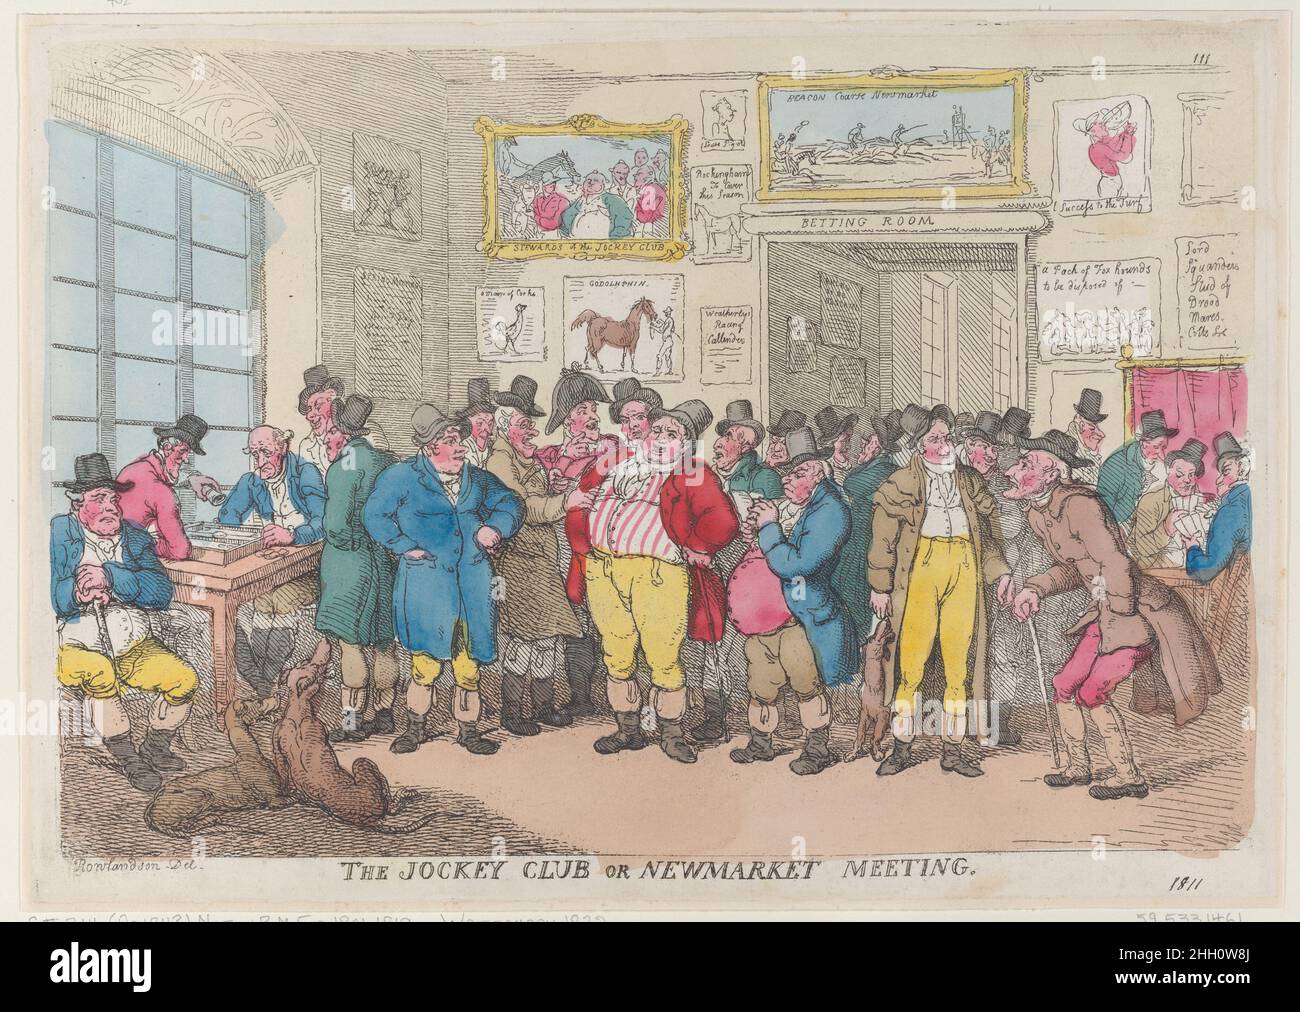 The Jockey Club or Newmarket Meeting [October 10, 1811], reprint Thomas Rowlandson A group of men gathers in a betting room, with two hunting dogs at left.. The Jockey Club or Newmarket Meeting. Thomas Rowlandson (British, London 1757–1827 London). [October 10, 1811], reprint. Hand-colored etching. Thomas Tegg (British, 1776–1846). Prints Stock Photo